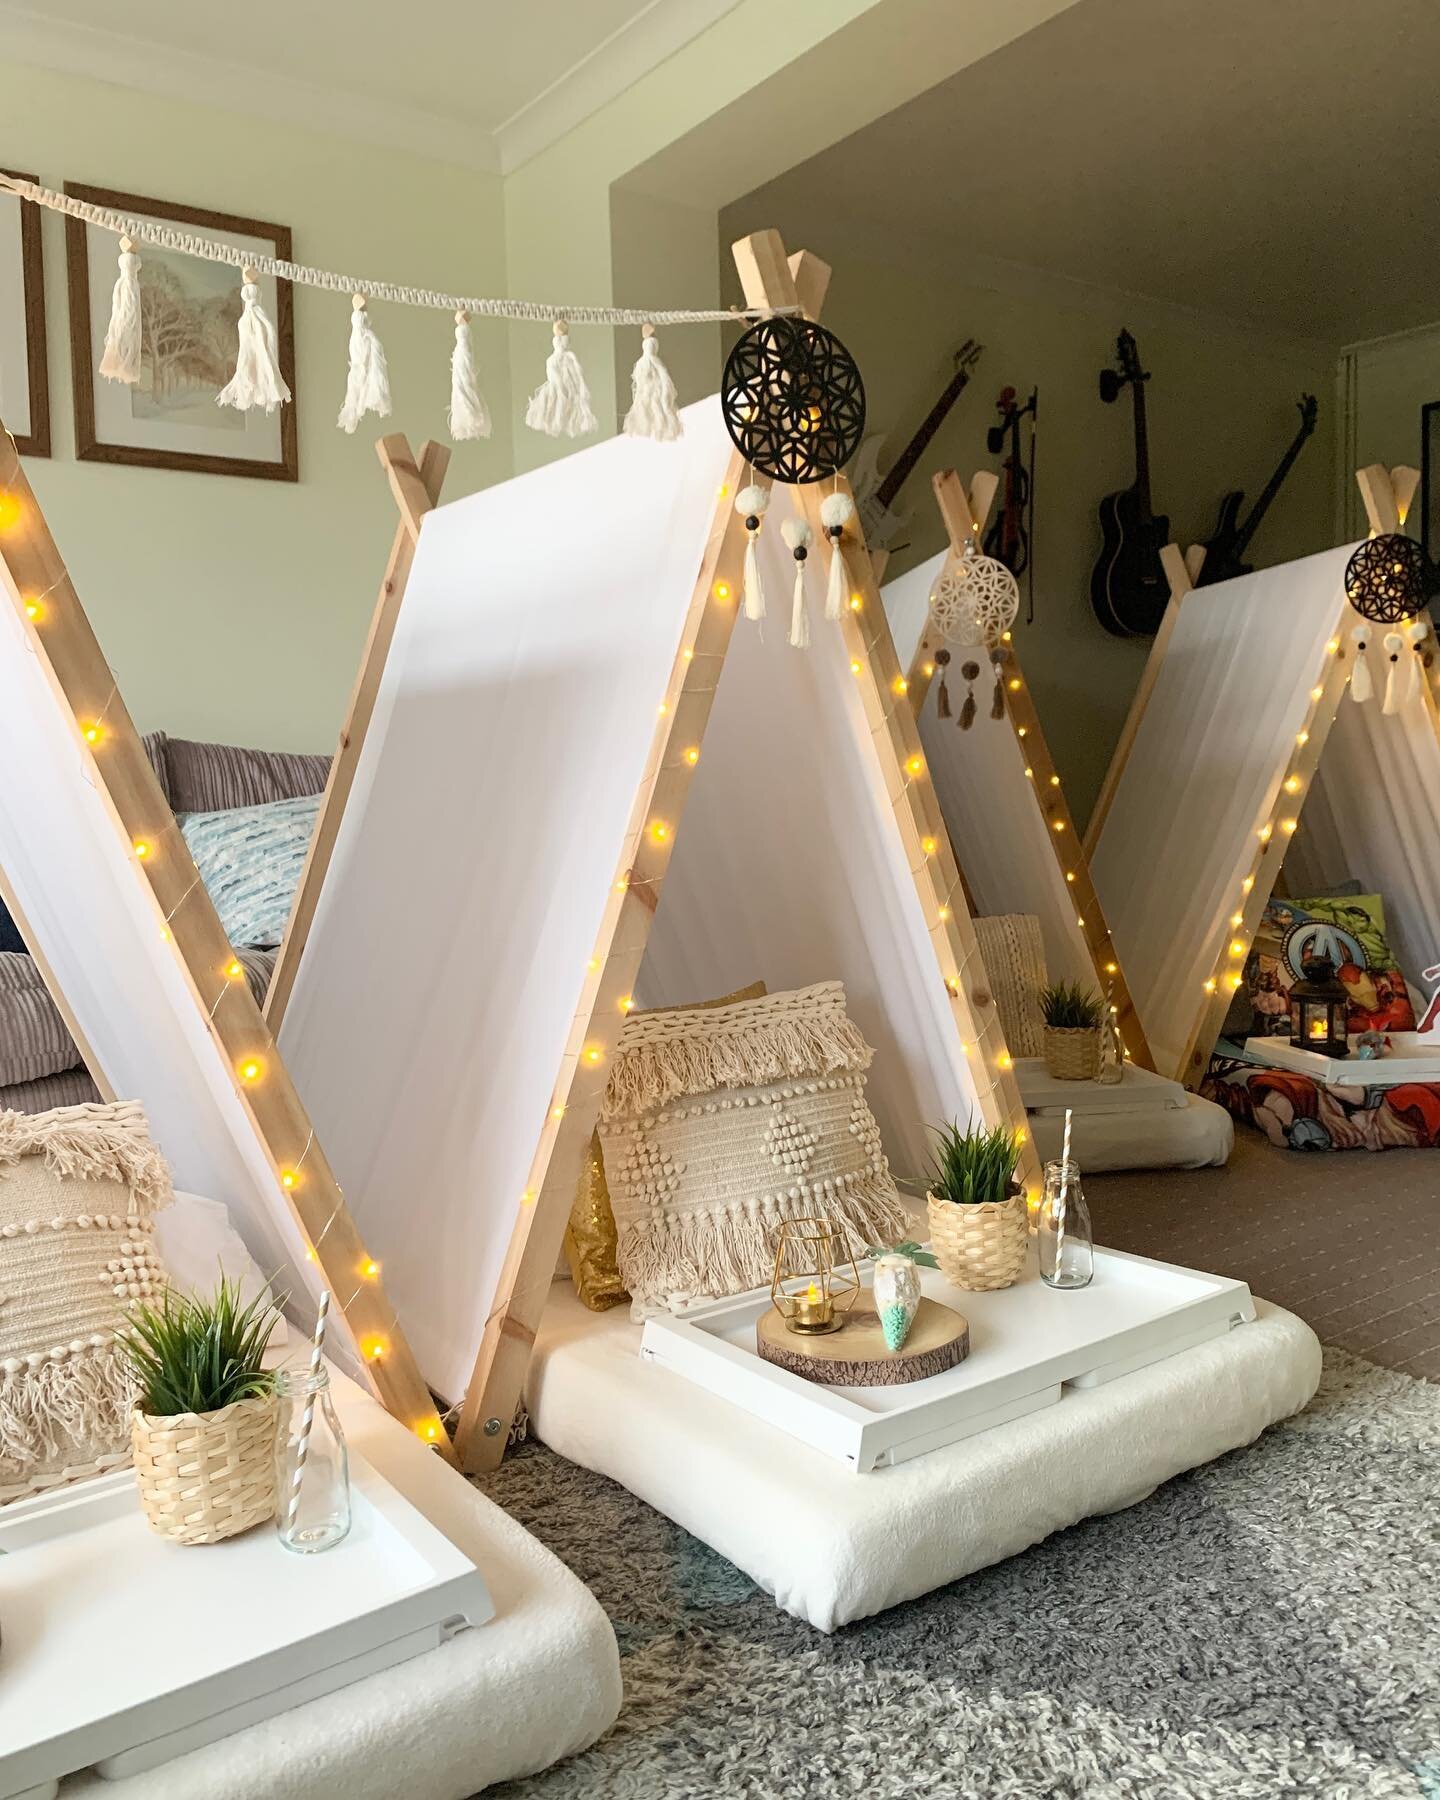 BOHO VIBES (with a touch of superheroes!)
This super chic boho sleepover featured a little superhero for one lucky little brother! Such a lovely family to set up for, I was lucky enough to see their reactions when they arrived, and then received the 